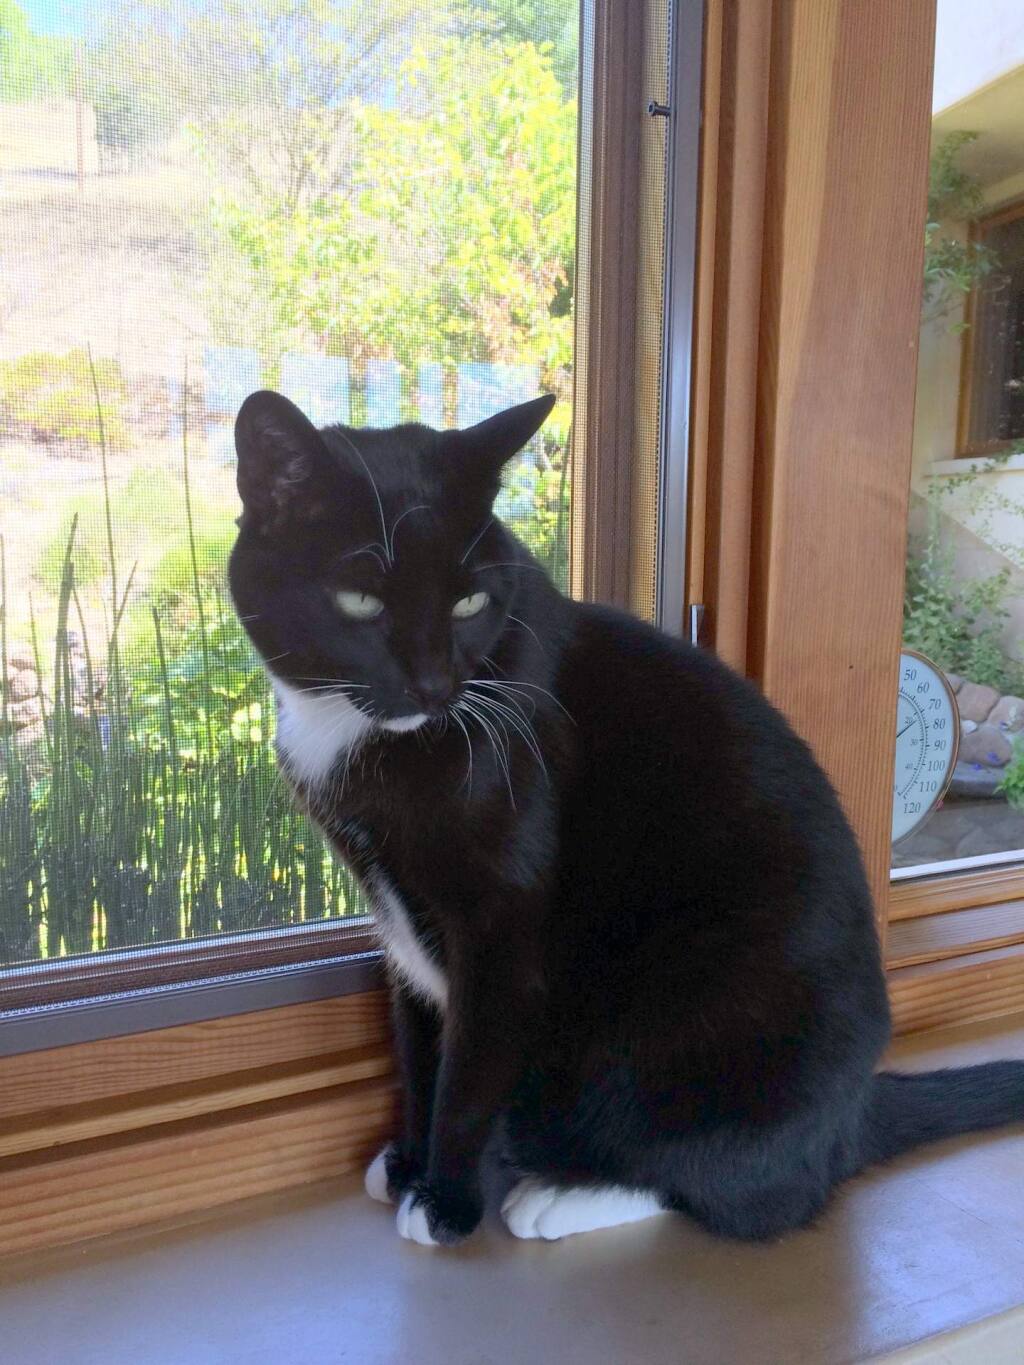 A Fairfield woman is suing a woman from Kenwood over which one is the rightful owner of a black-and-white cat, named David by one and Whiley by the other. (Photo courtesy Leo Bartolotta)